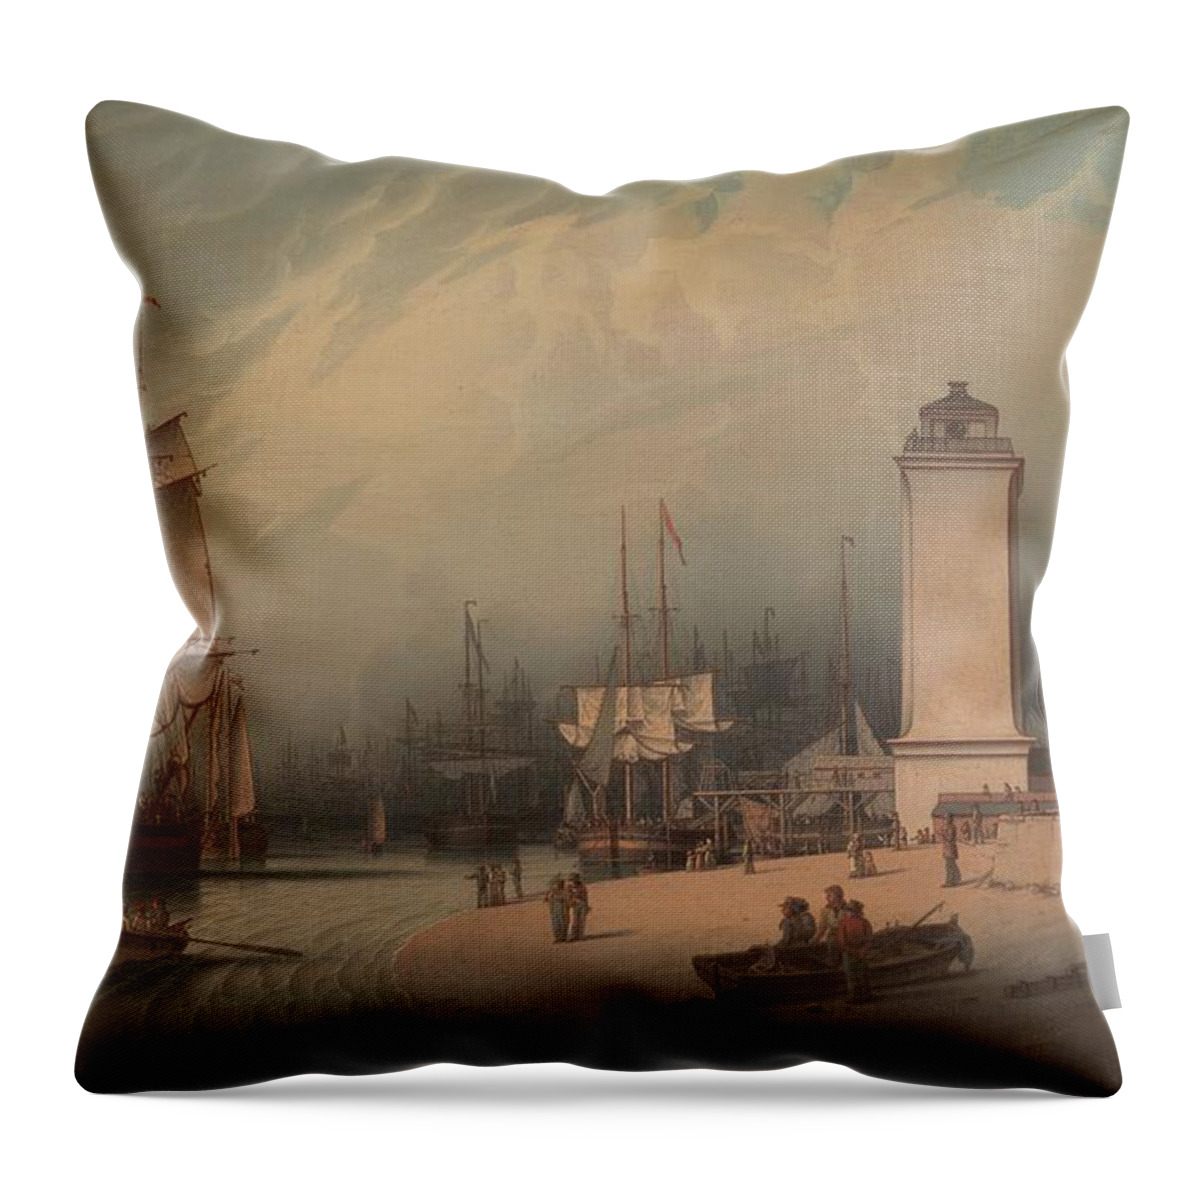 The Low Lighthouse Throw Pillow featuring the painting The Low Lighthouse, North Shields by Robert Salmon, 1828. by Celestial Images